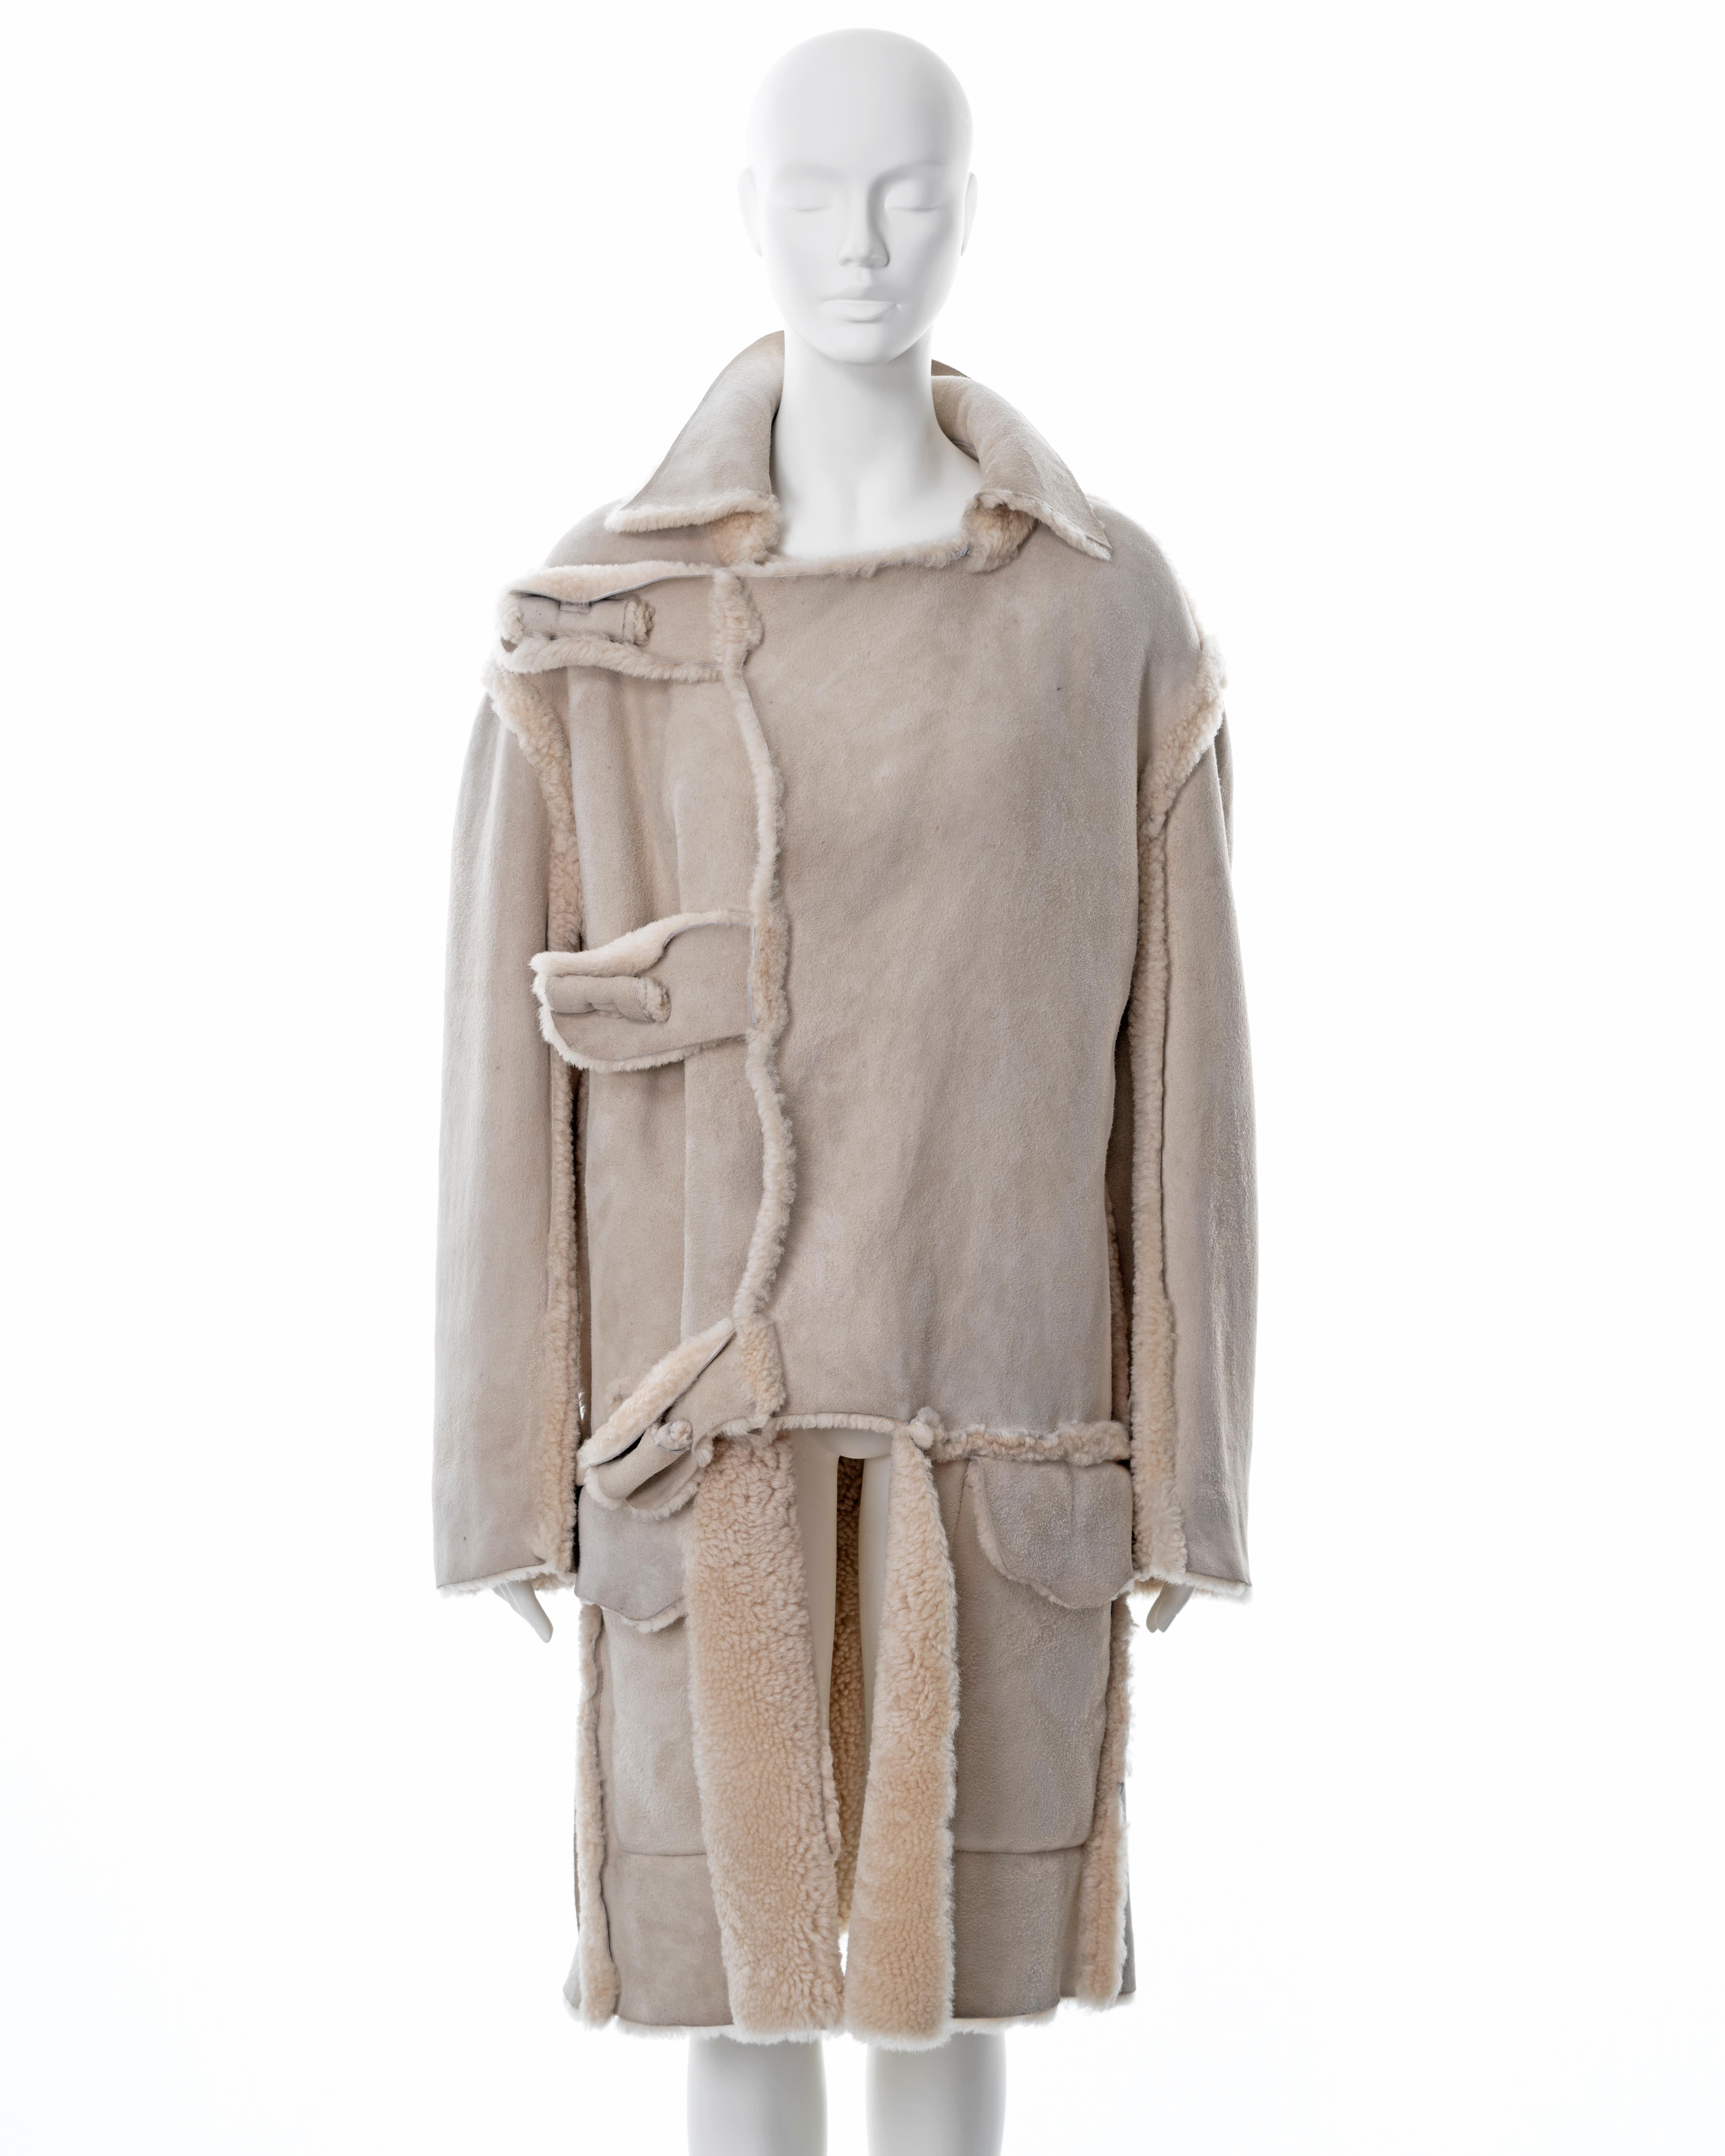 Worlds End by Vivienne Westwood and Malcolm McLaren 'Buffalo' coat, fw 1982 For Sale 2